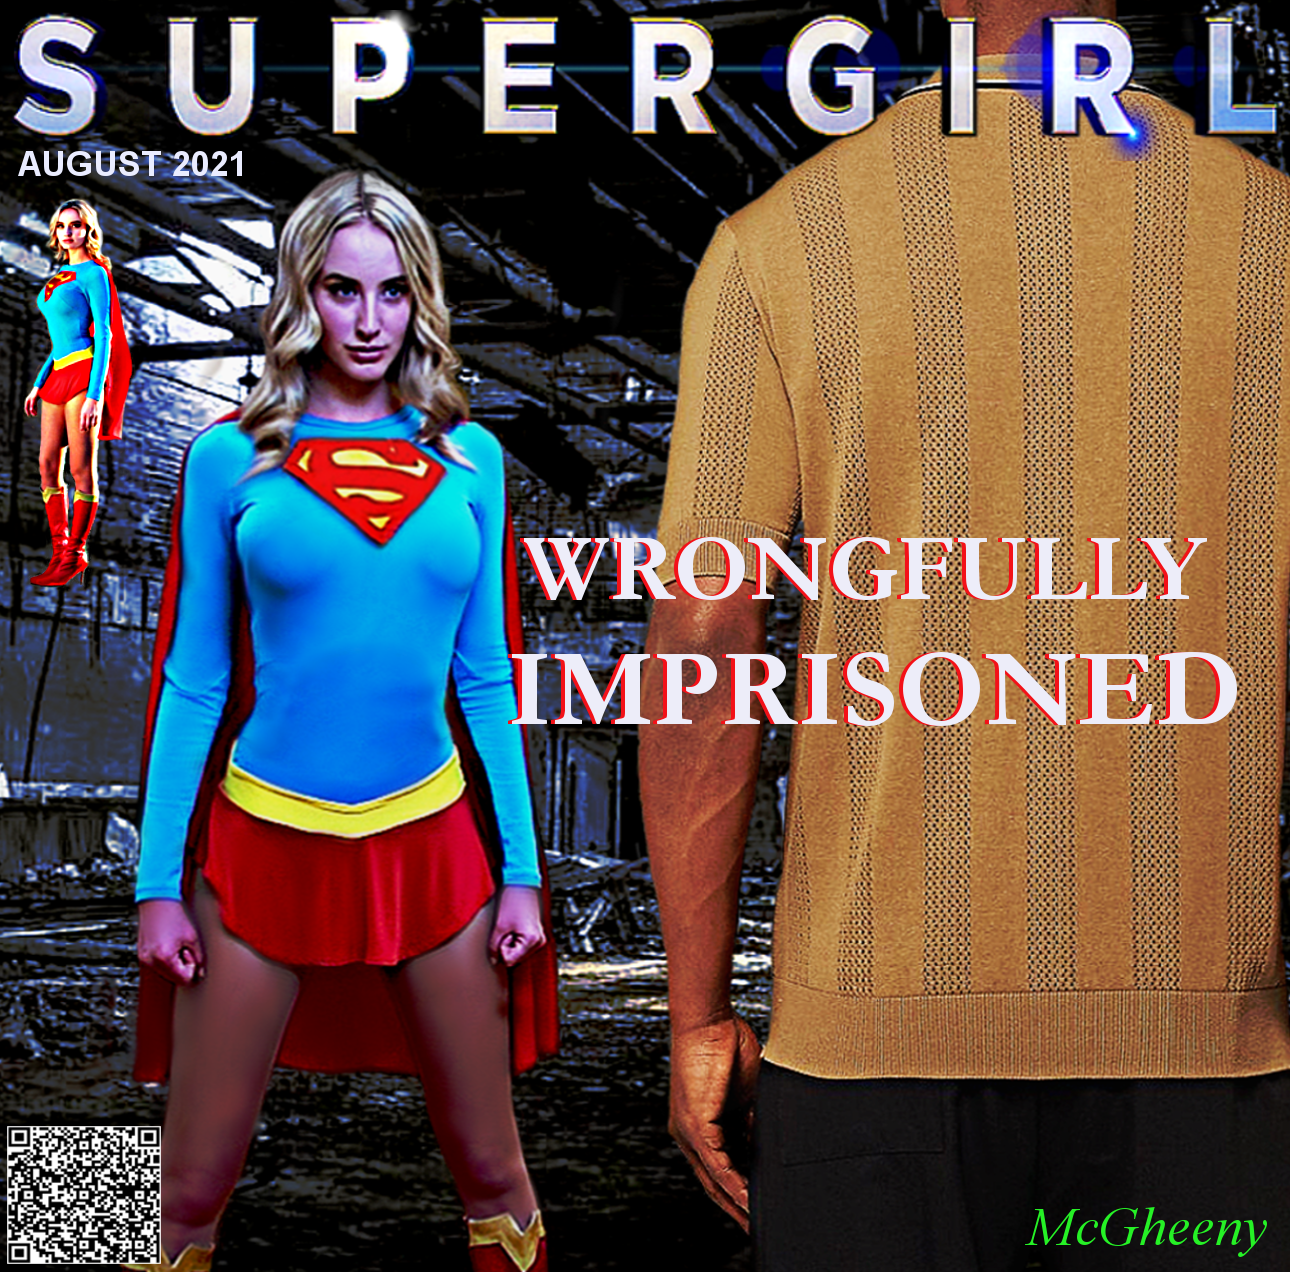 Supergirl in Wrongfully Imprisoned COVER.png